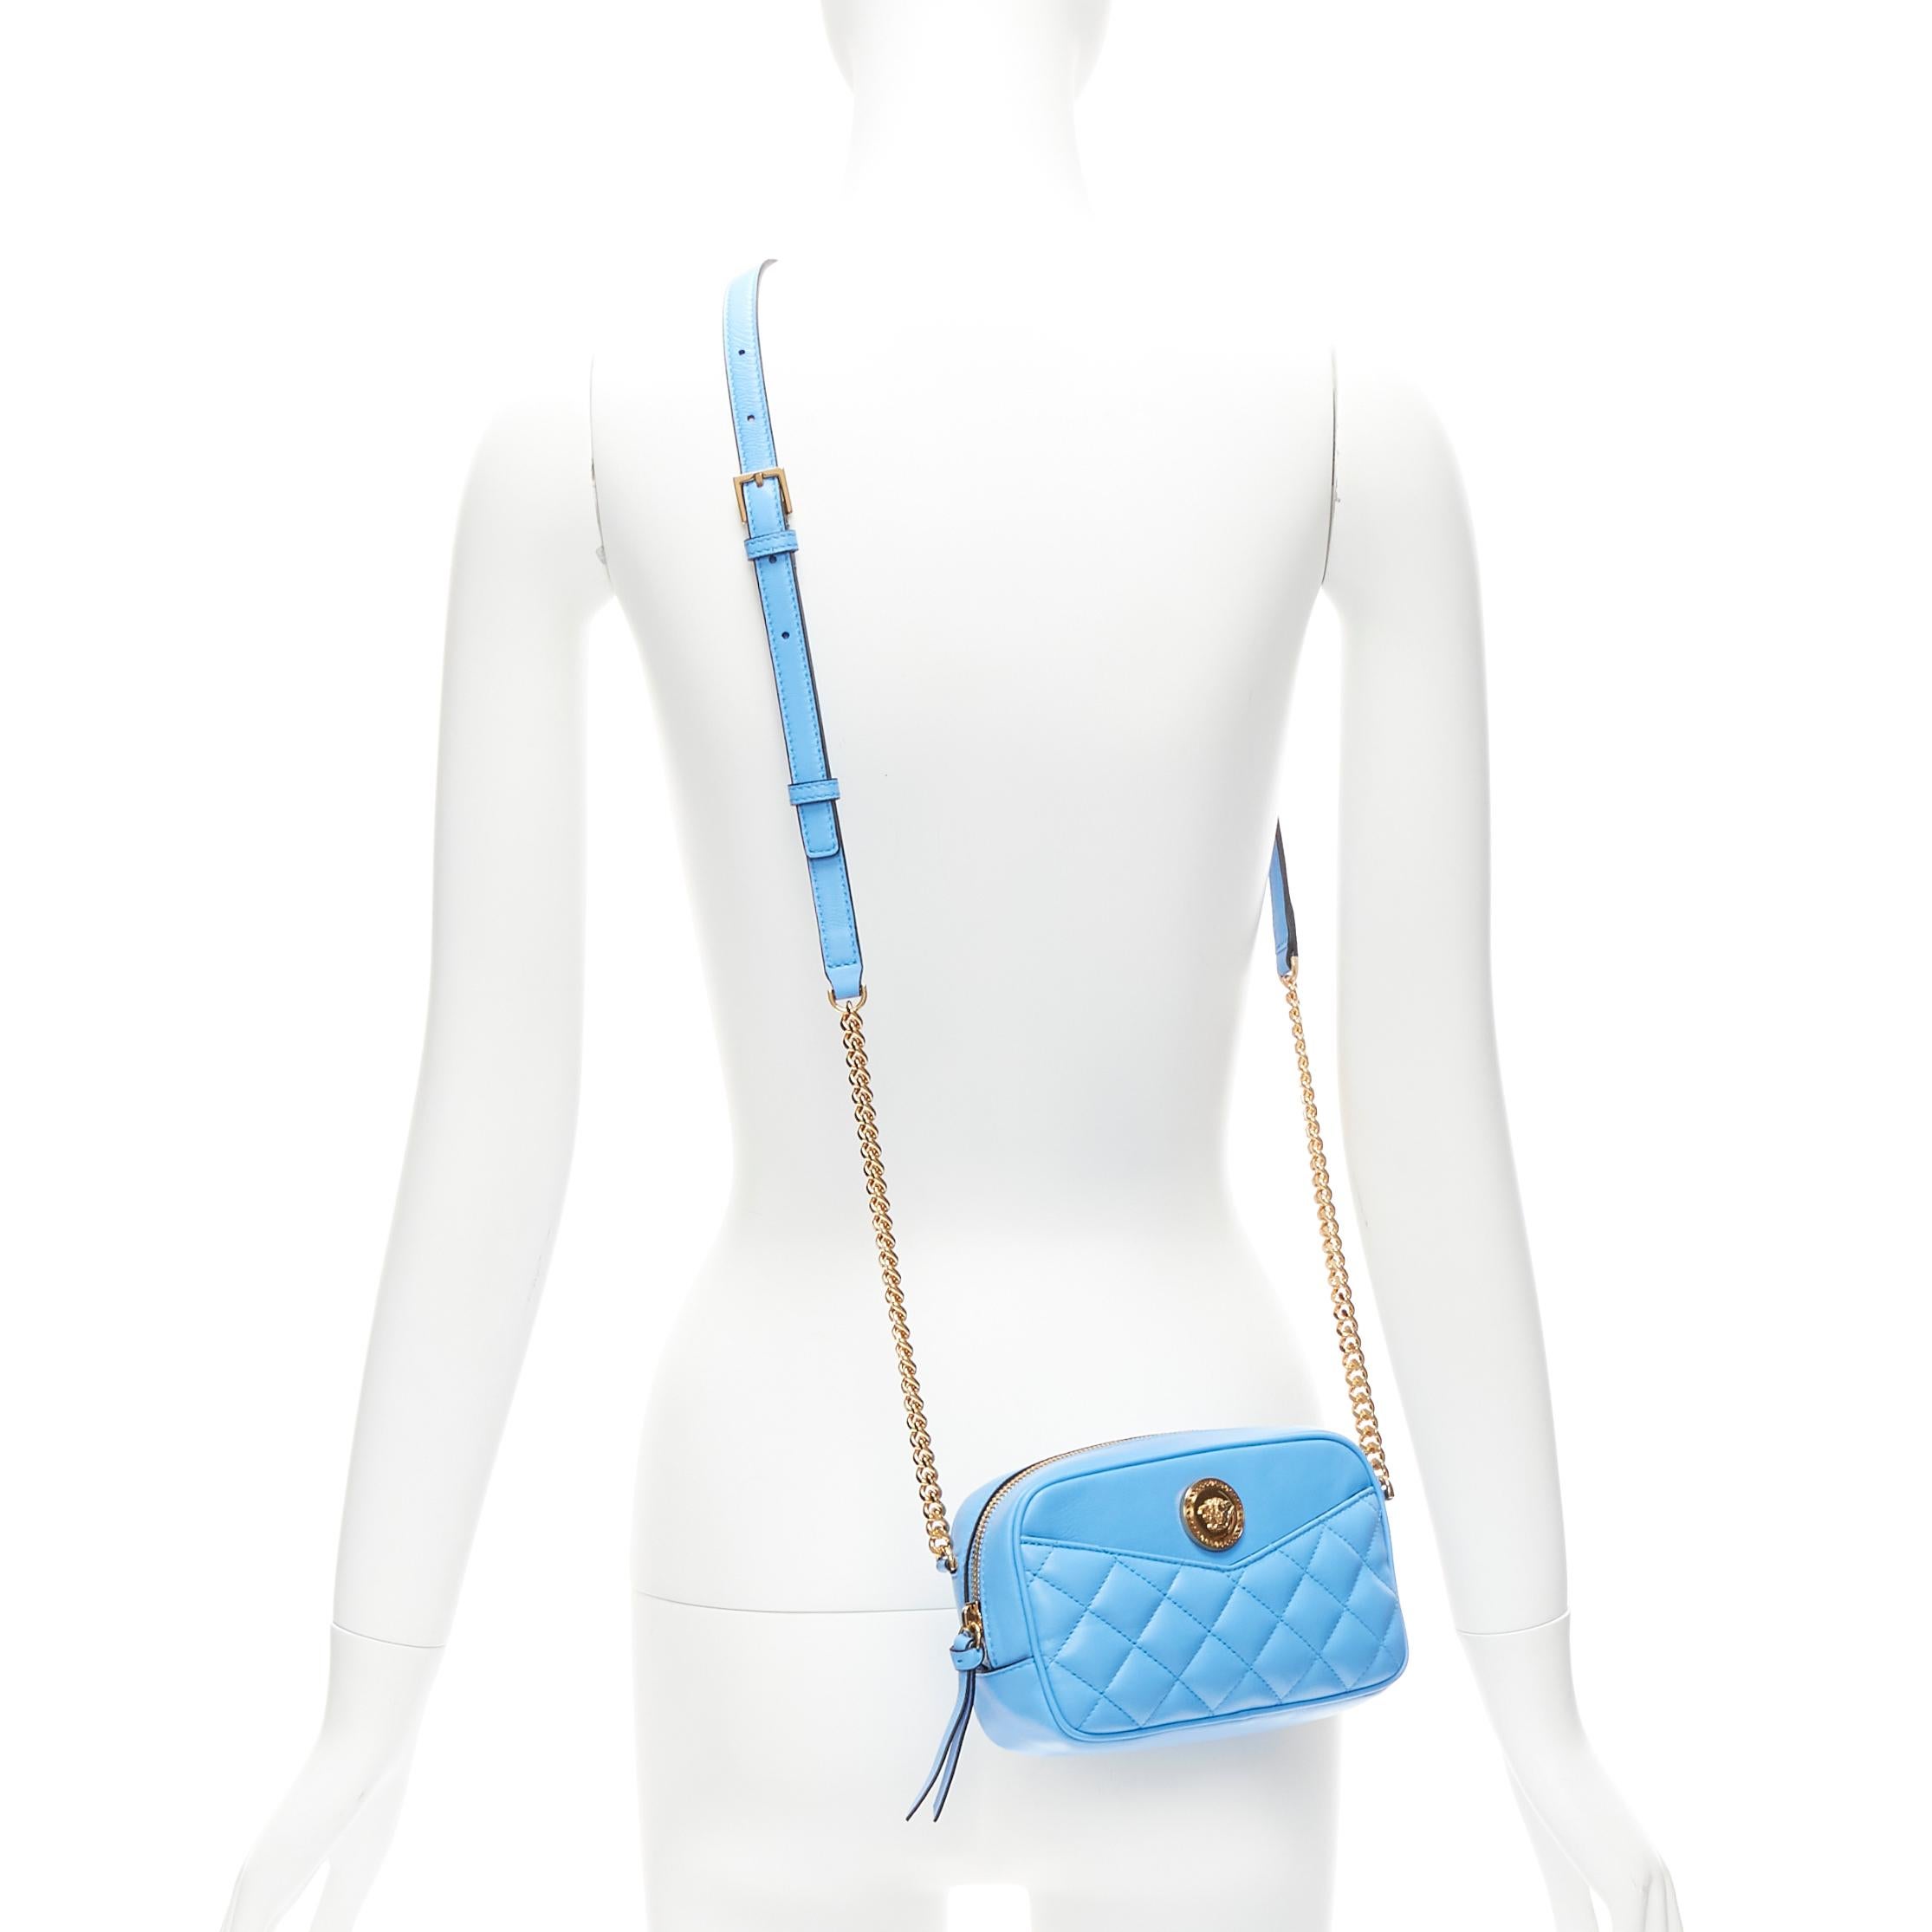 VERSACE blue lambskin leather quilted gold Medusa chain crossbody bag Small
Reference: TGAS/D00812
Brand: Versace
Designer: Donatella Versace
Model: 1008827 1A03912 !V57V
Collection: Tribute
Material: Lambskin Leather, Metal
Color: Blue,